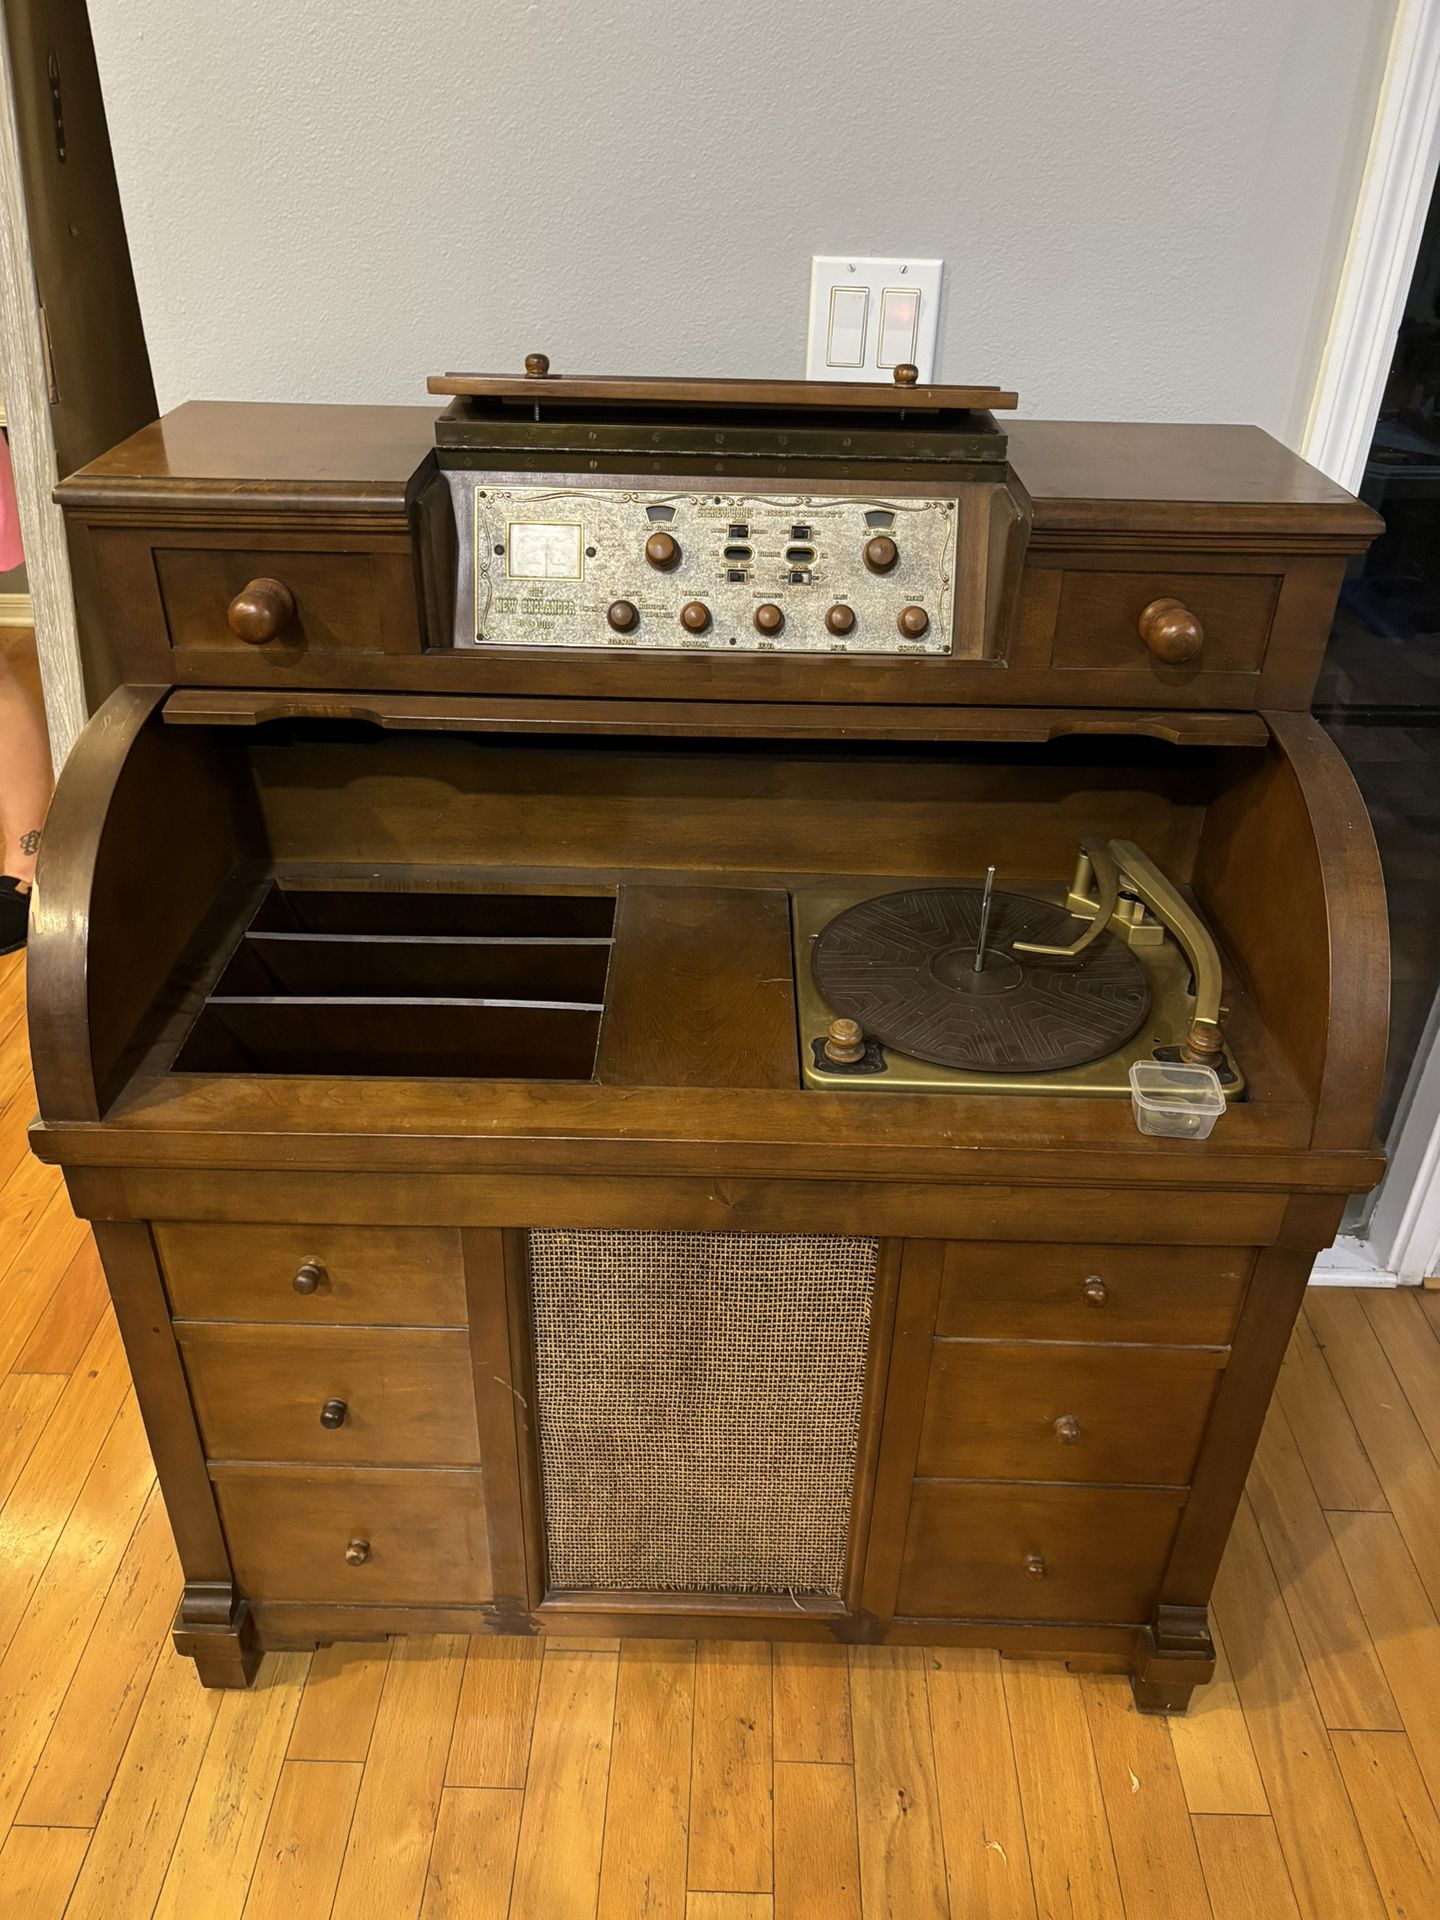 Vintage record player and radio radio all in one